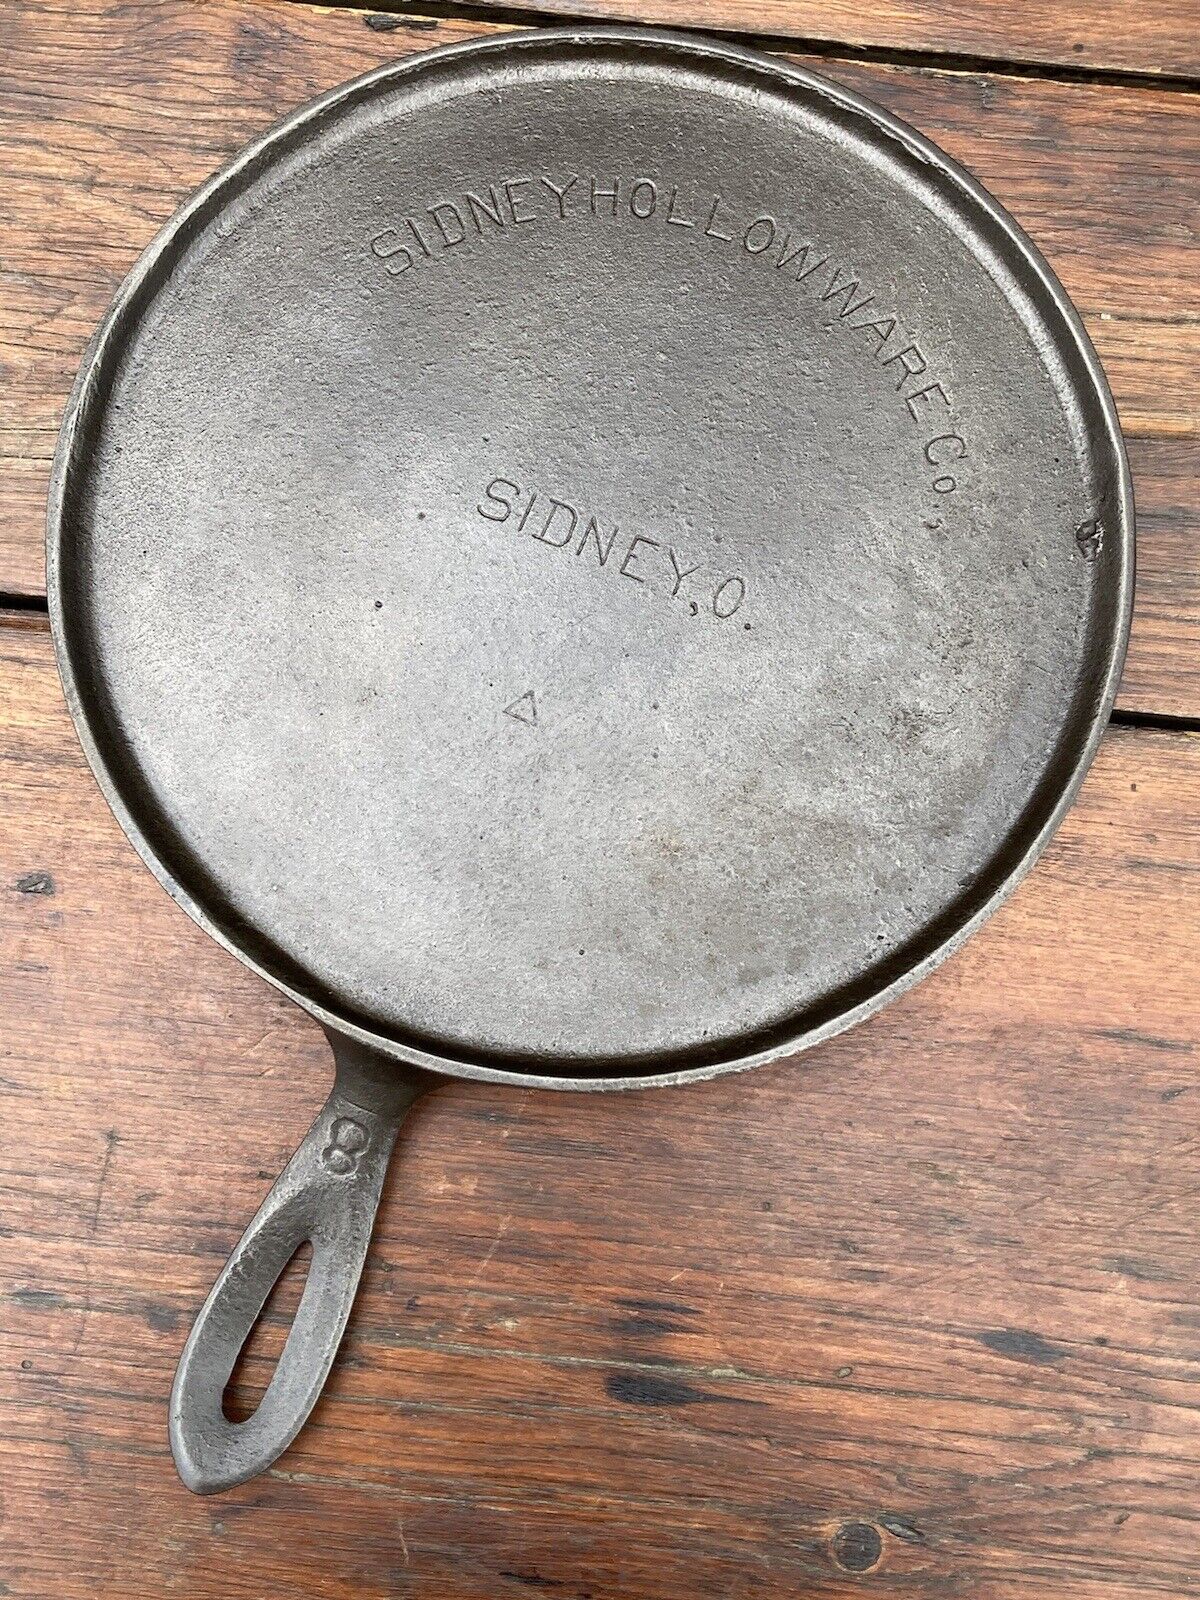 Sidney Hollow Ware #8 Cast Iron Griddle